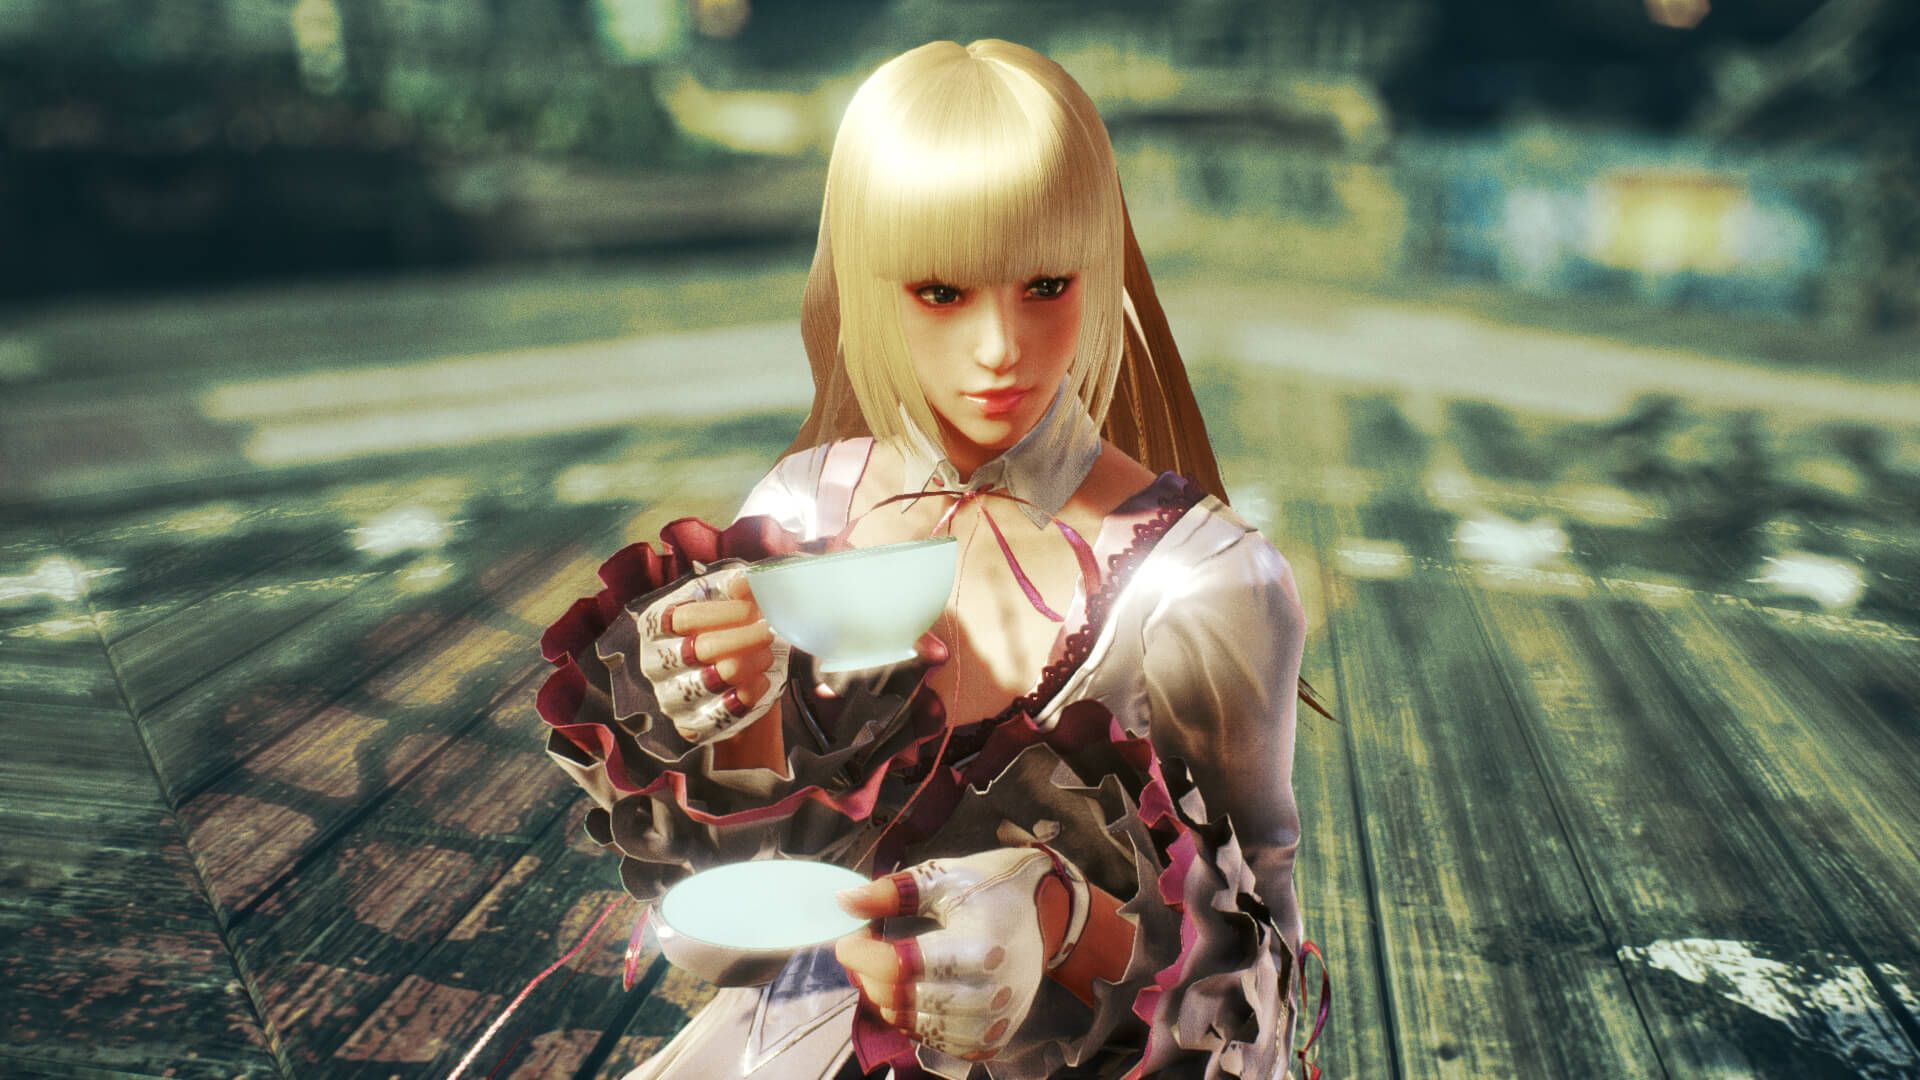 The new update did not fix all the bugs in Tekken 7